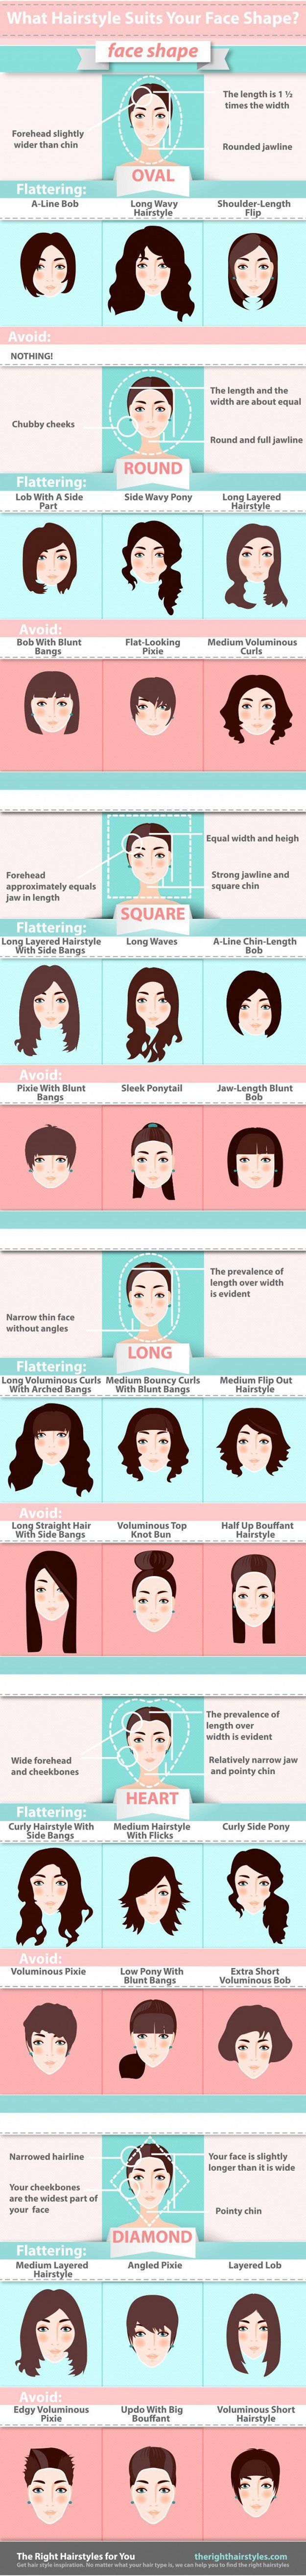 Best Hairstyles for Your Face Shape, check it out at makeuptutorials.c...